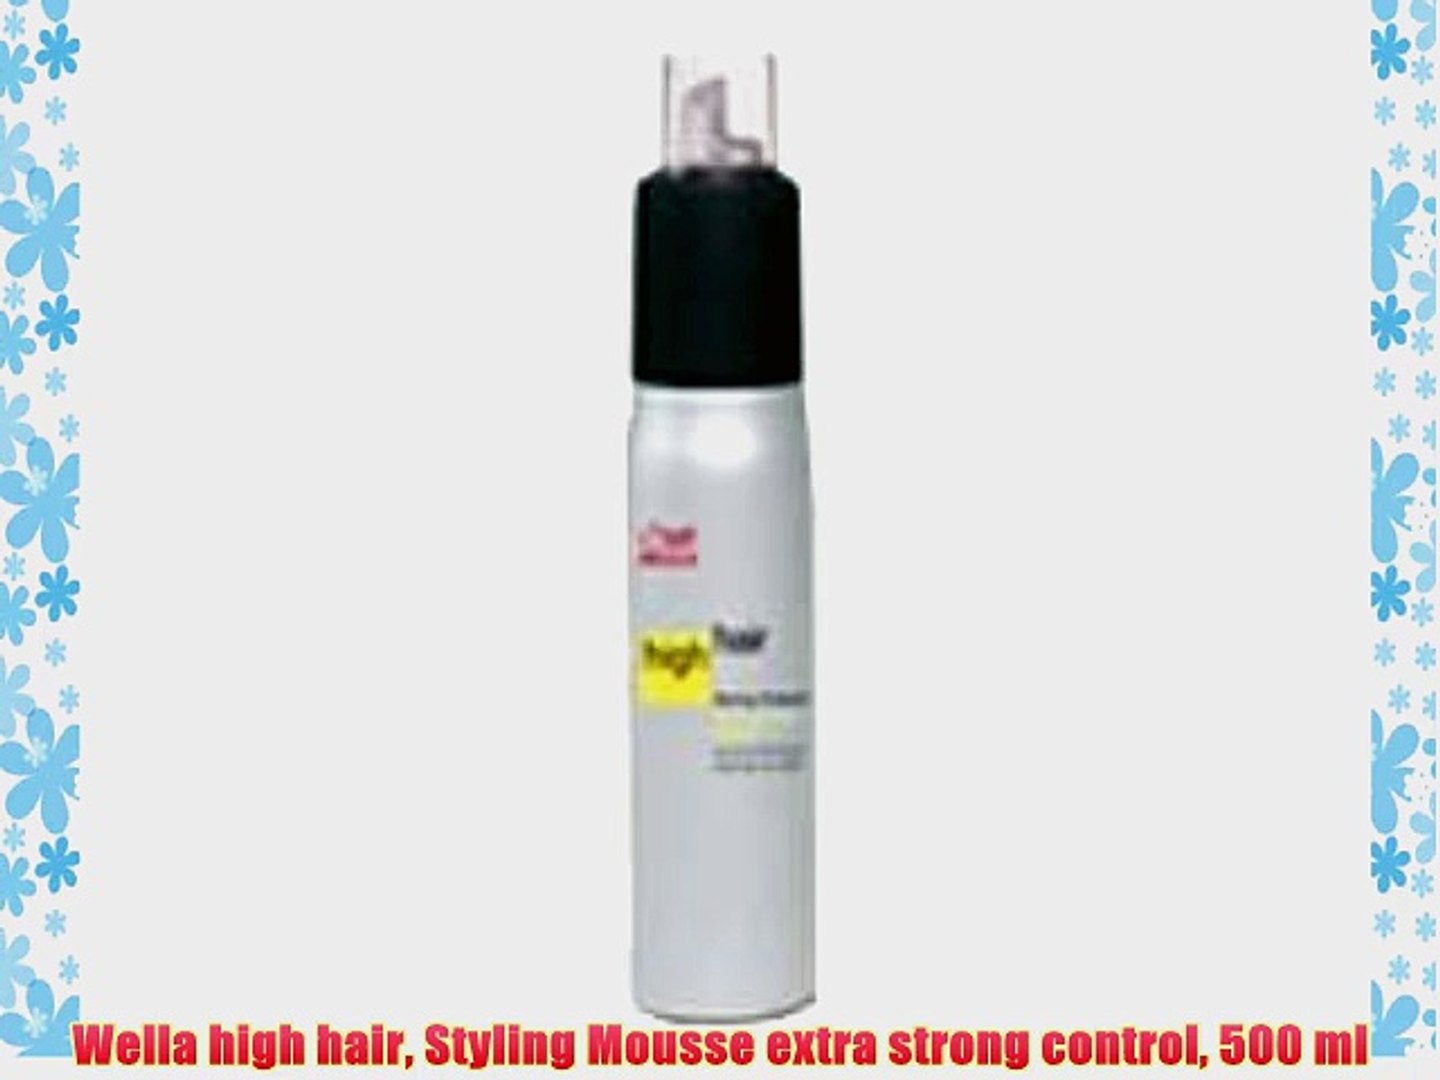 Wella high hair Styling Mousse extra strong control 500 ml - video  Dailymotion